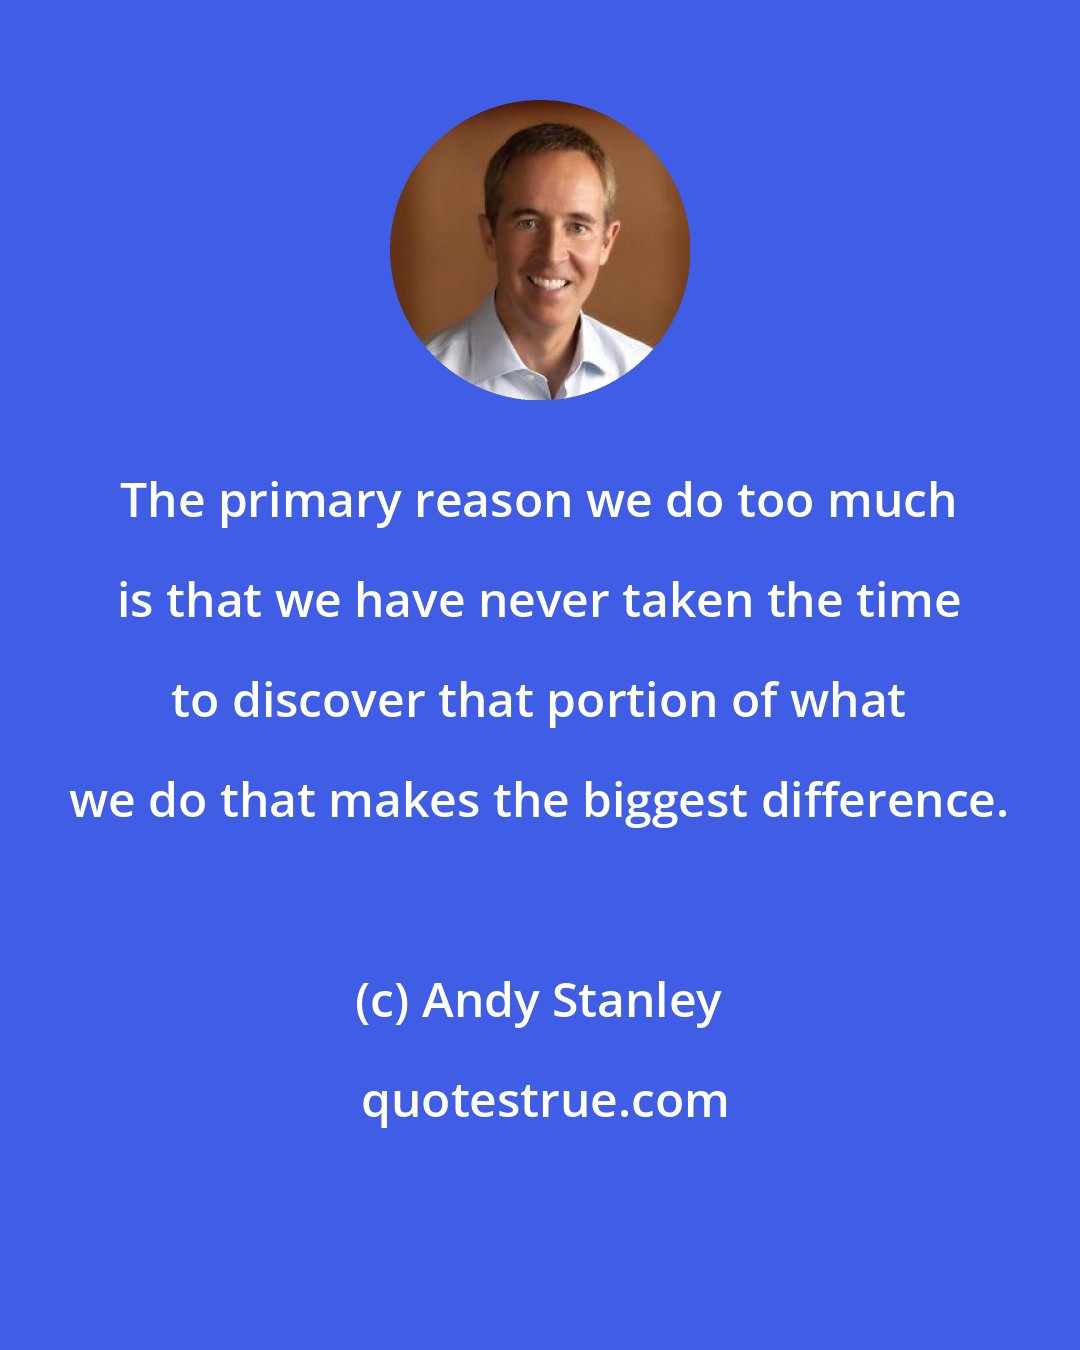 Andy Stanley: The primary reason we do too much is that we have never taken the time to discover that portion of what we do that makes the biggest difference.